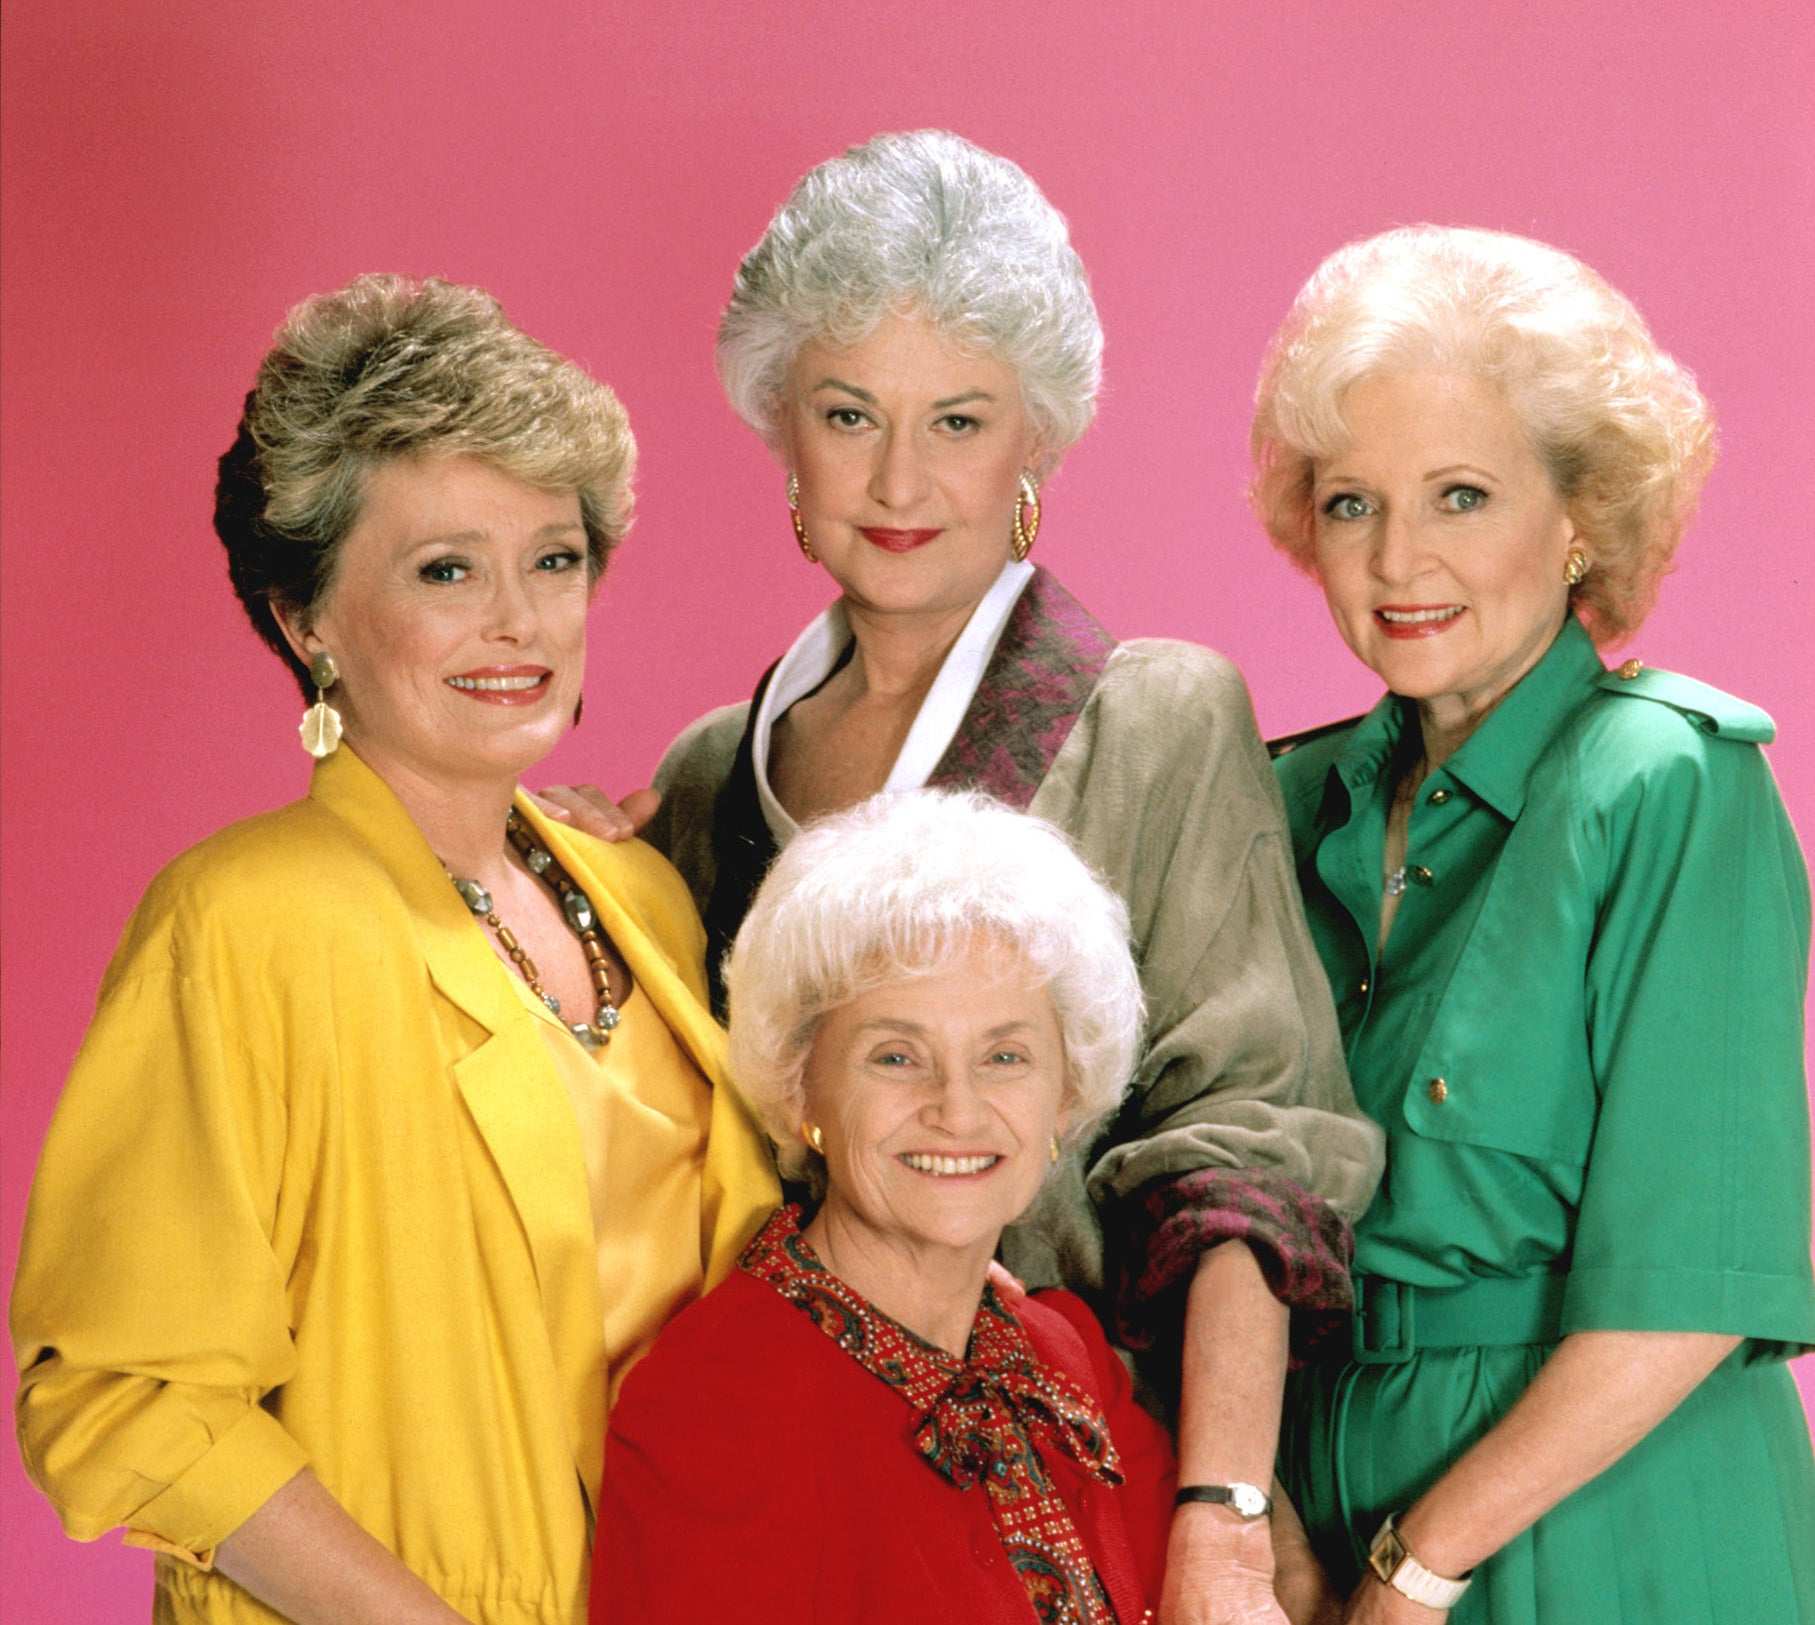 A publicity photo of The Golden Girls